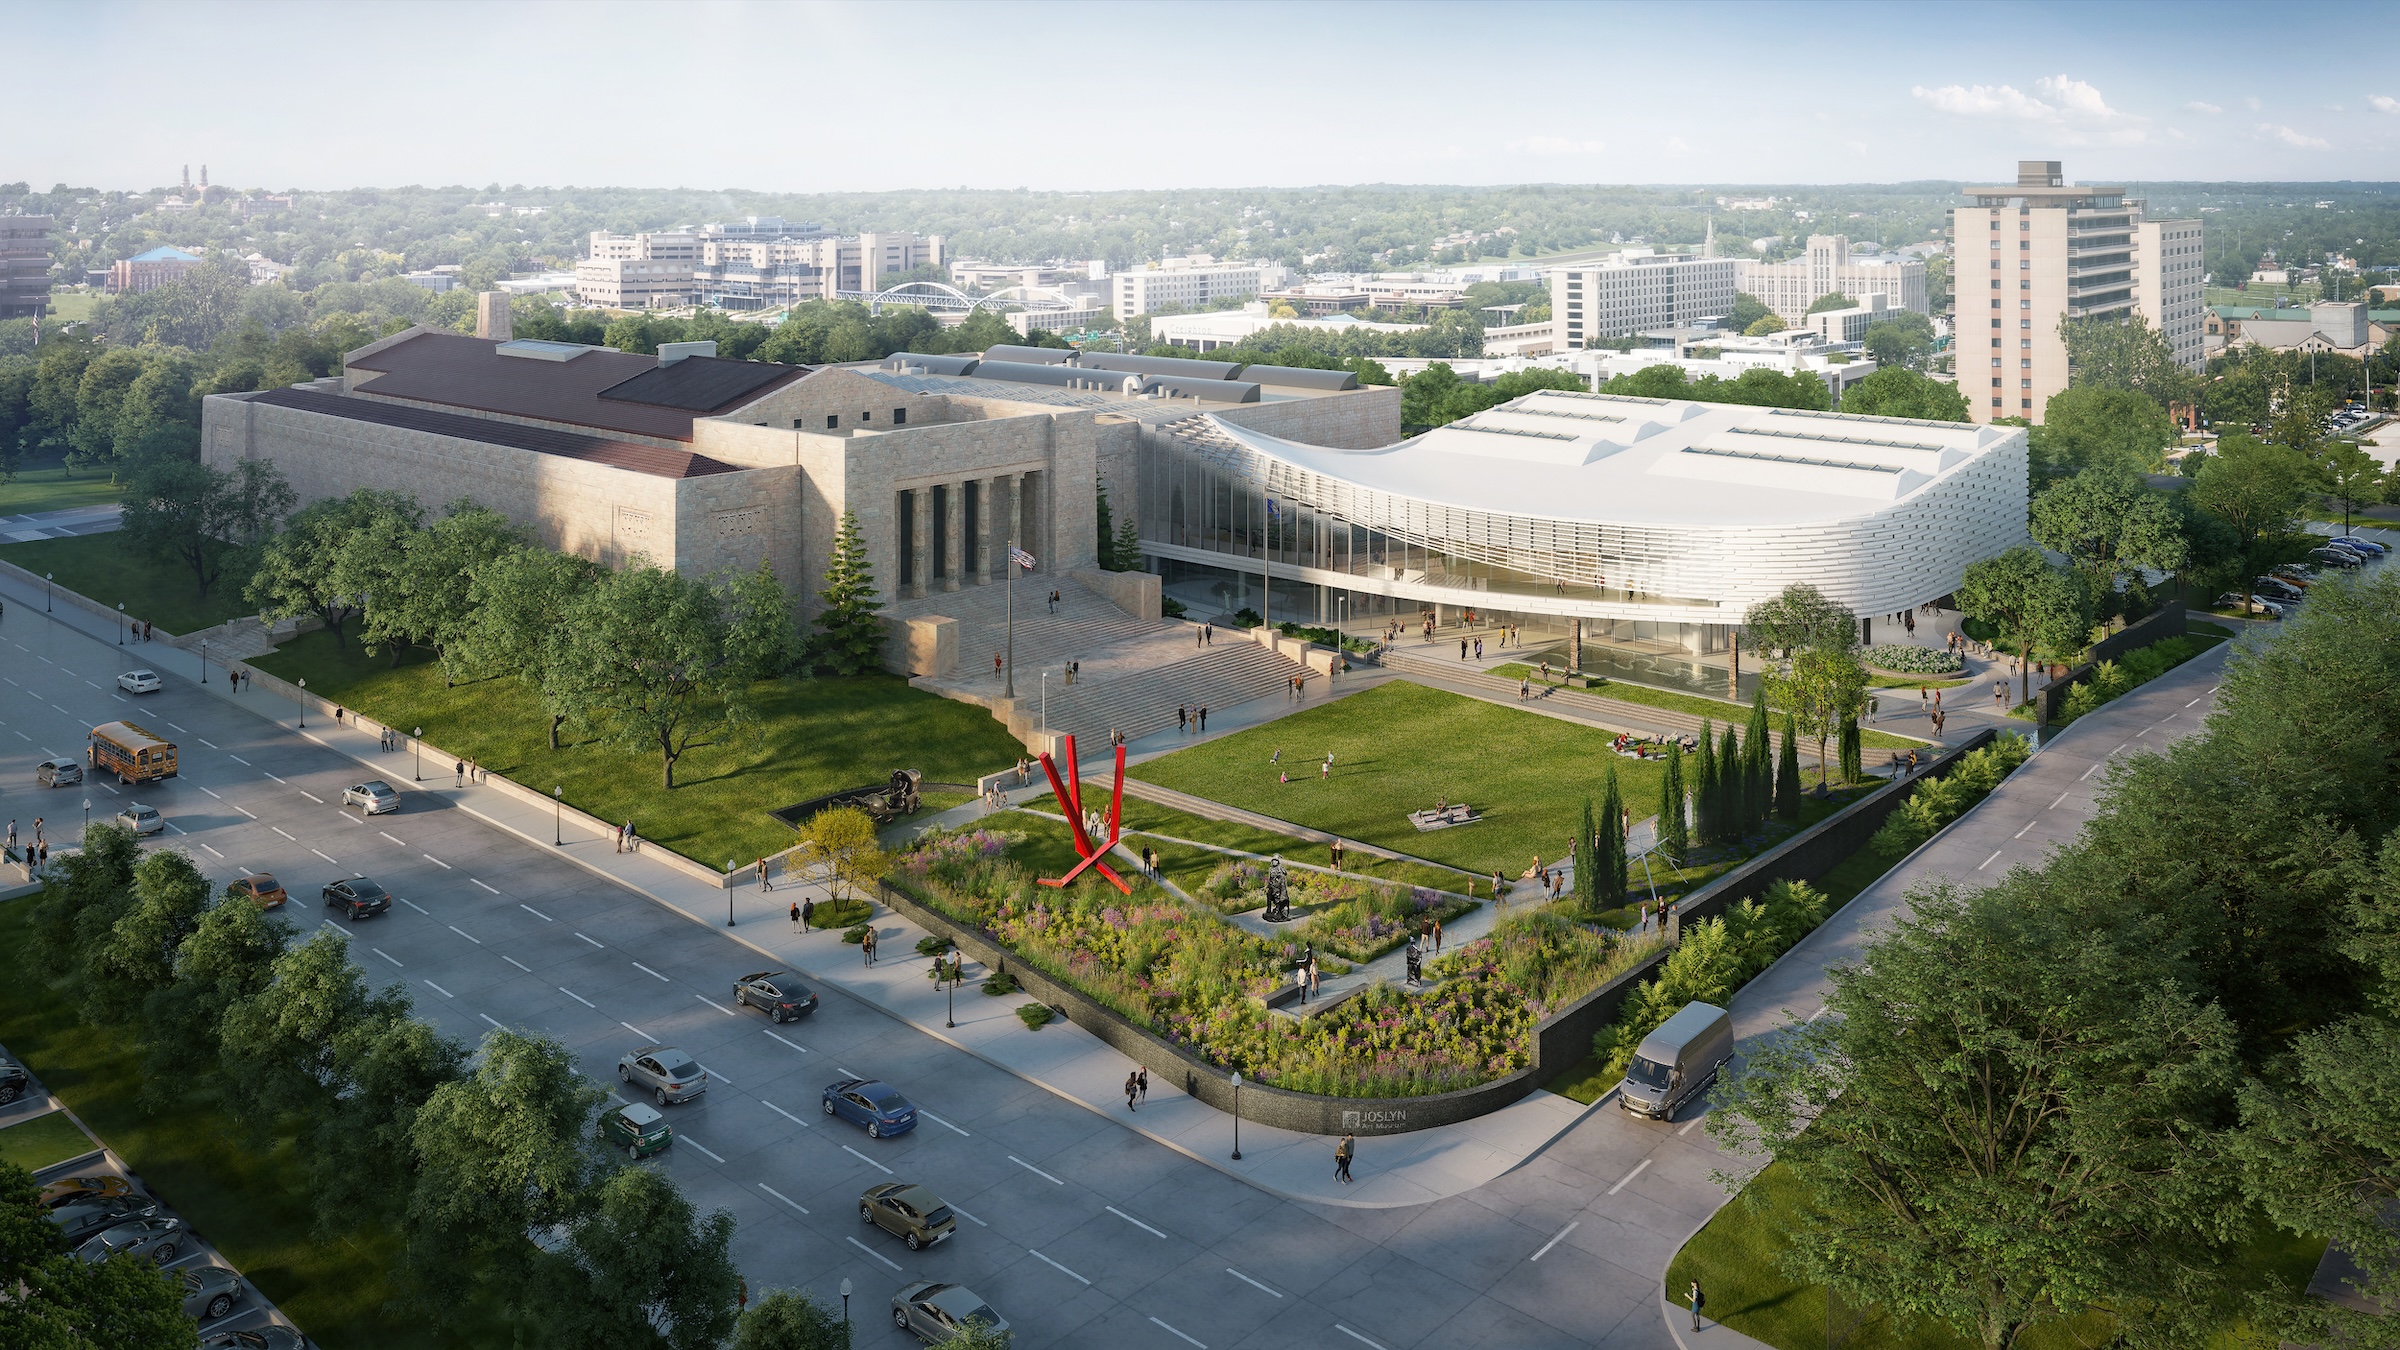 Southeast aerial view of the Joslyn Art Museum. Rendering courtesy Moare